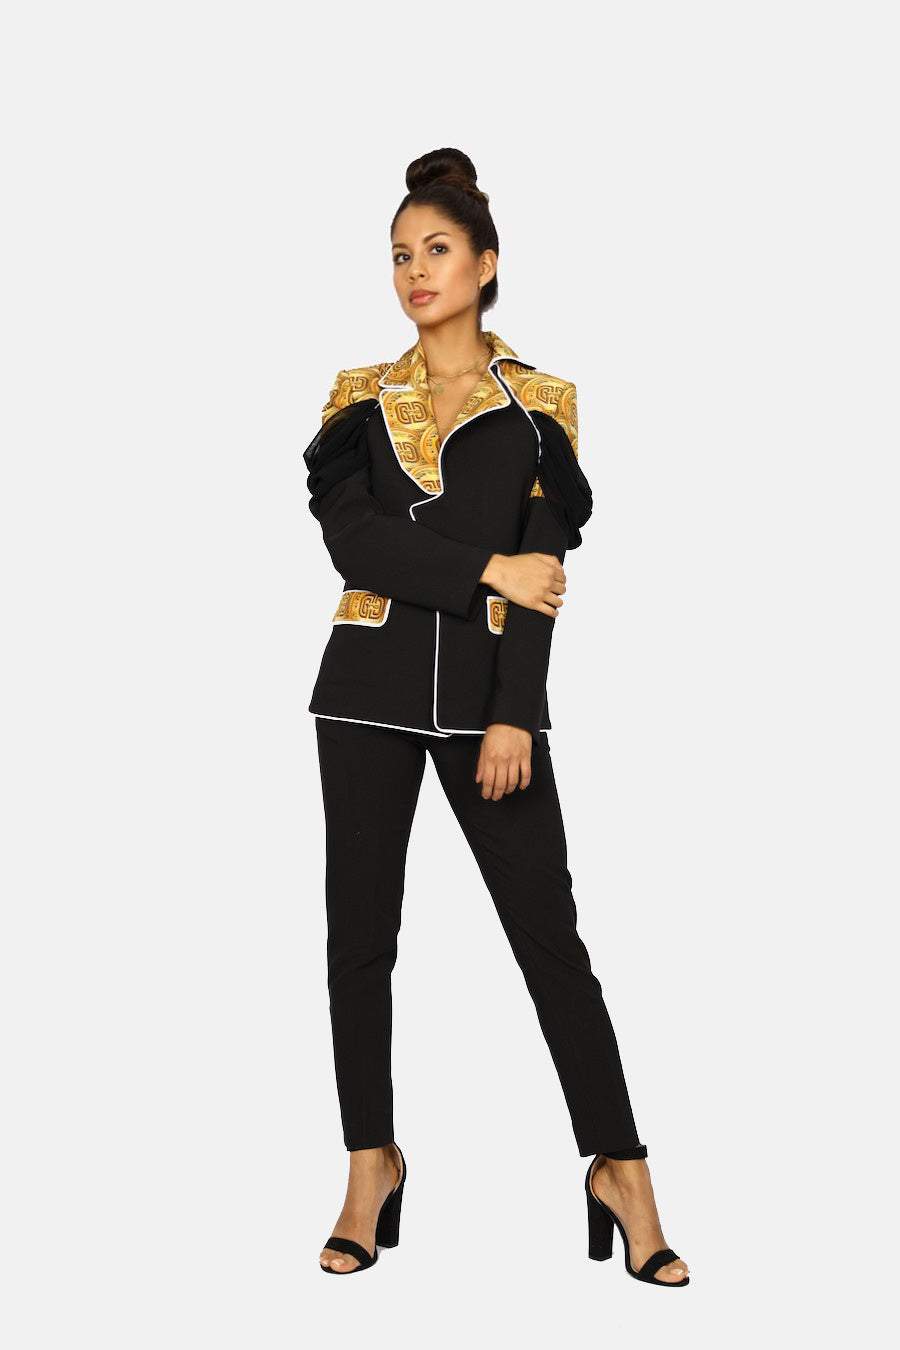 African Office Suit Black-danddclothing-AFRICAN WEAR FOR WOMEN,Black,Ladies Suits